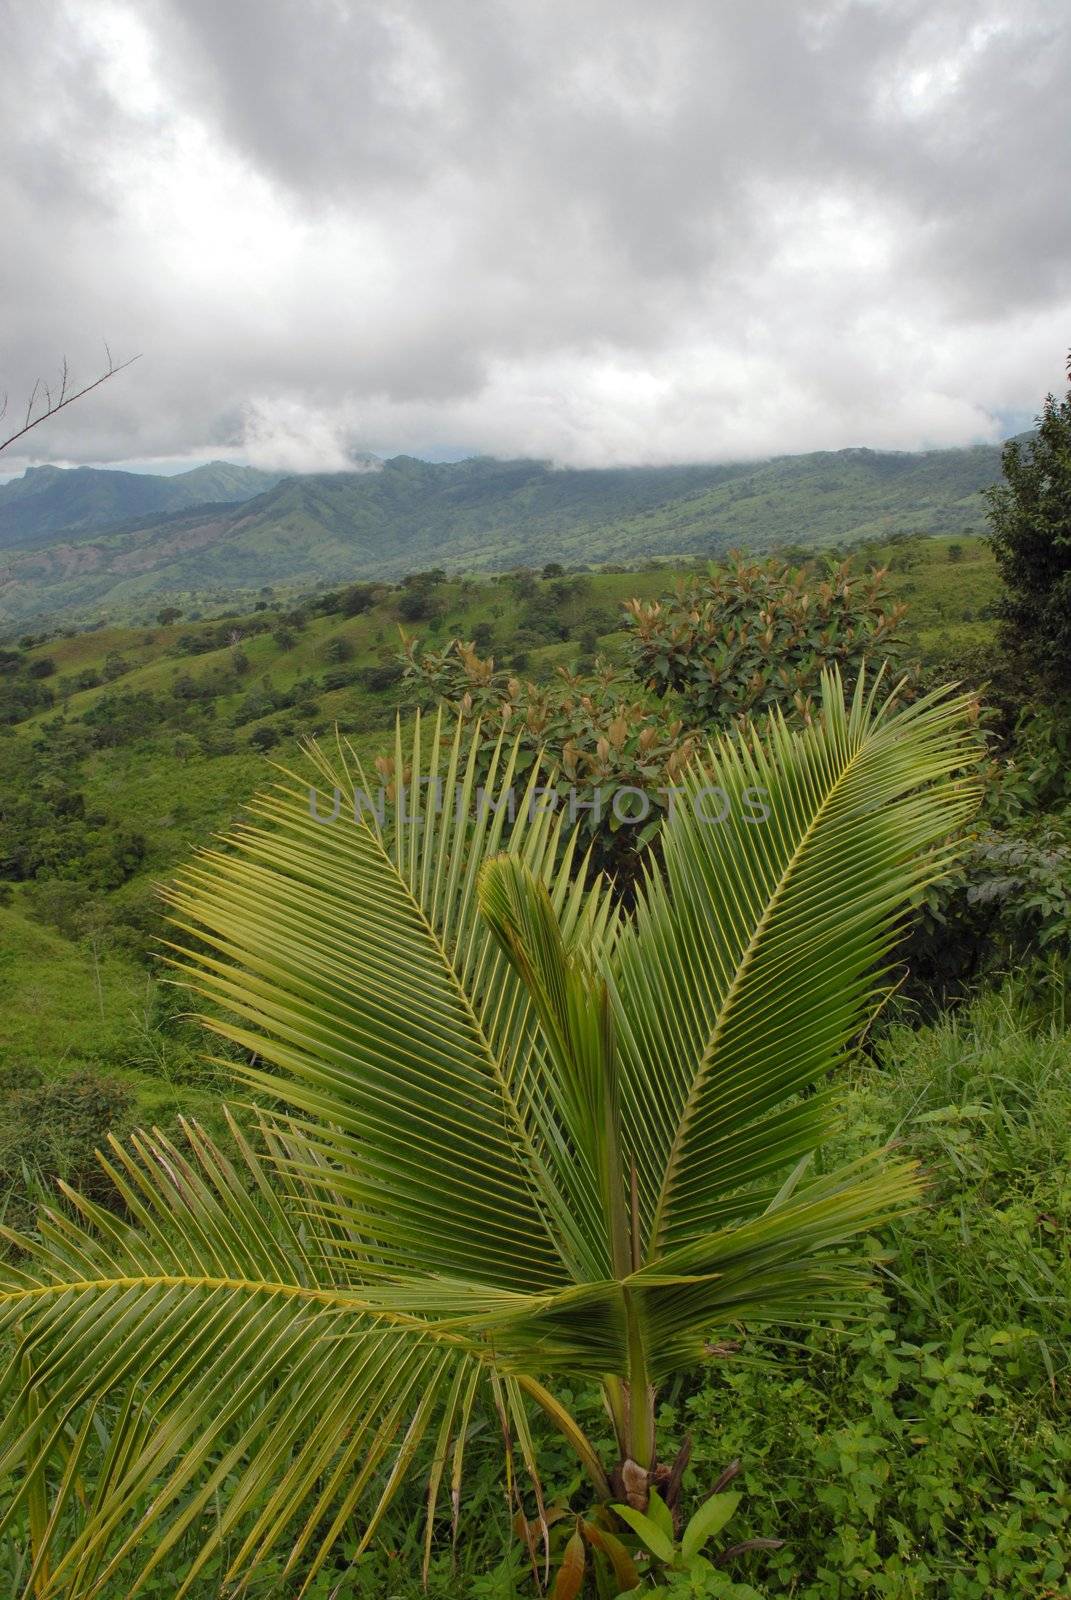 View from a tropical valley under a cloudy sky. Central Panama
